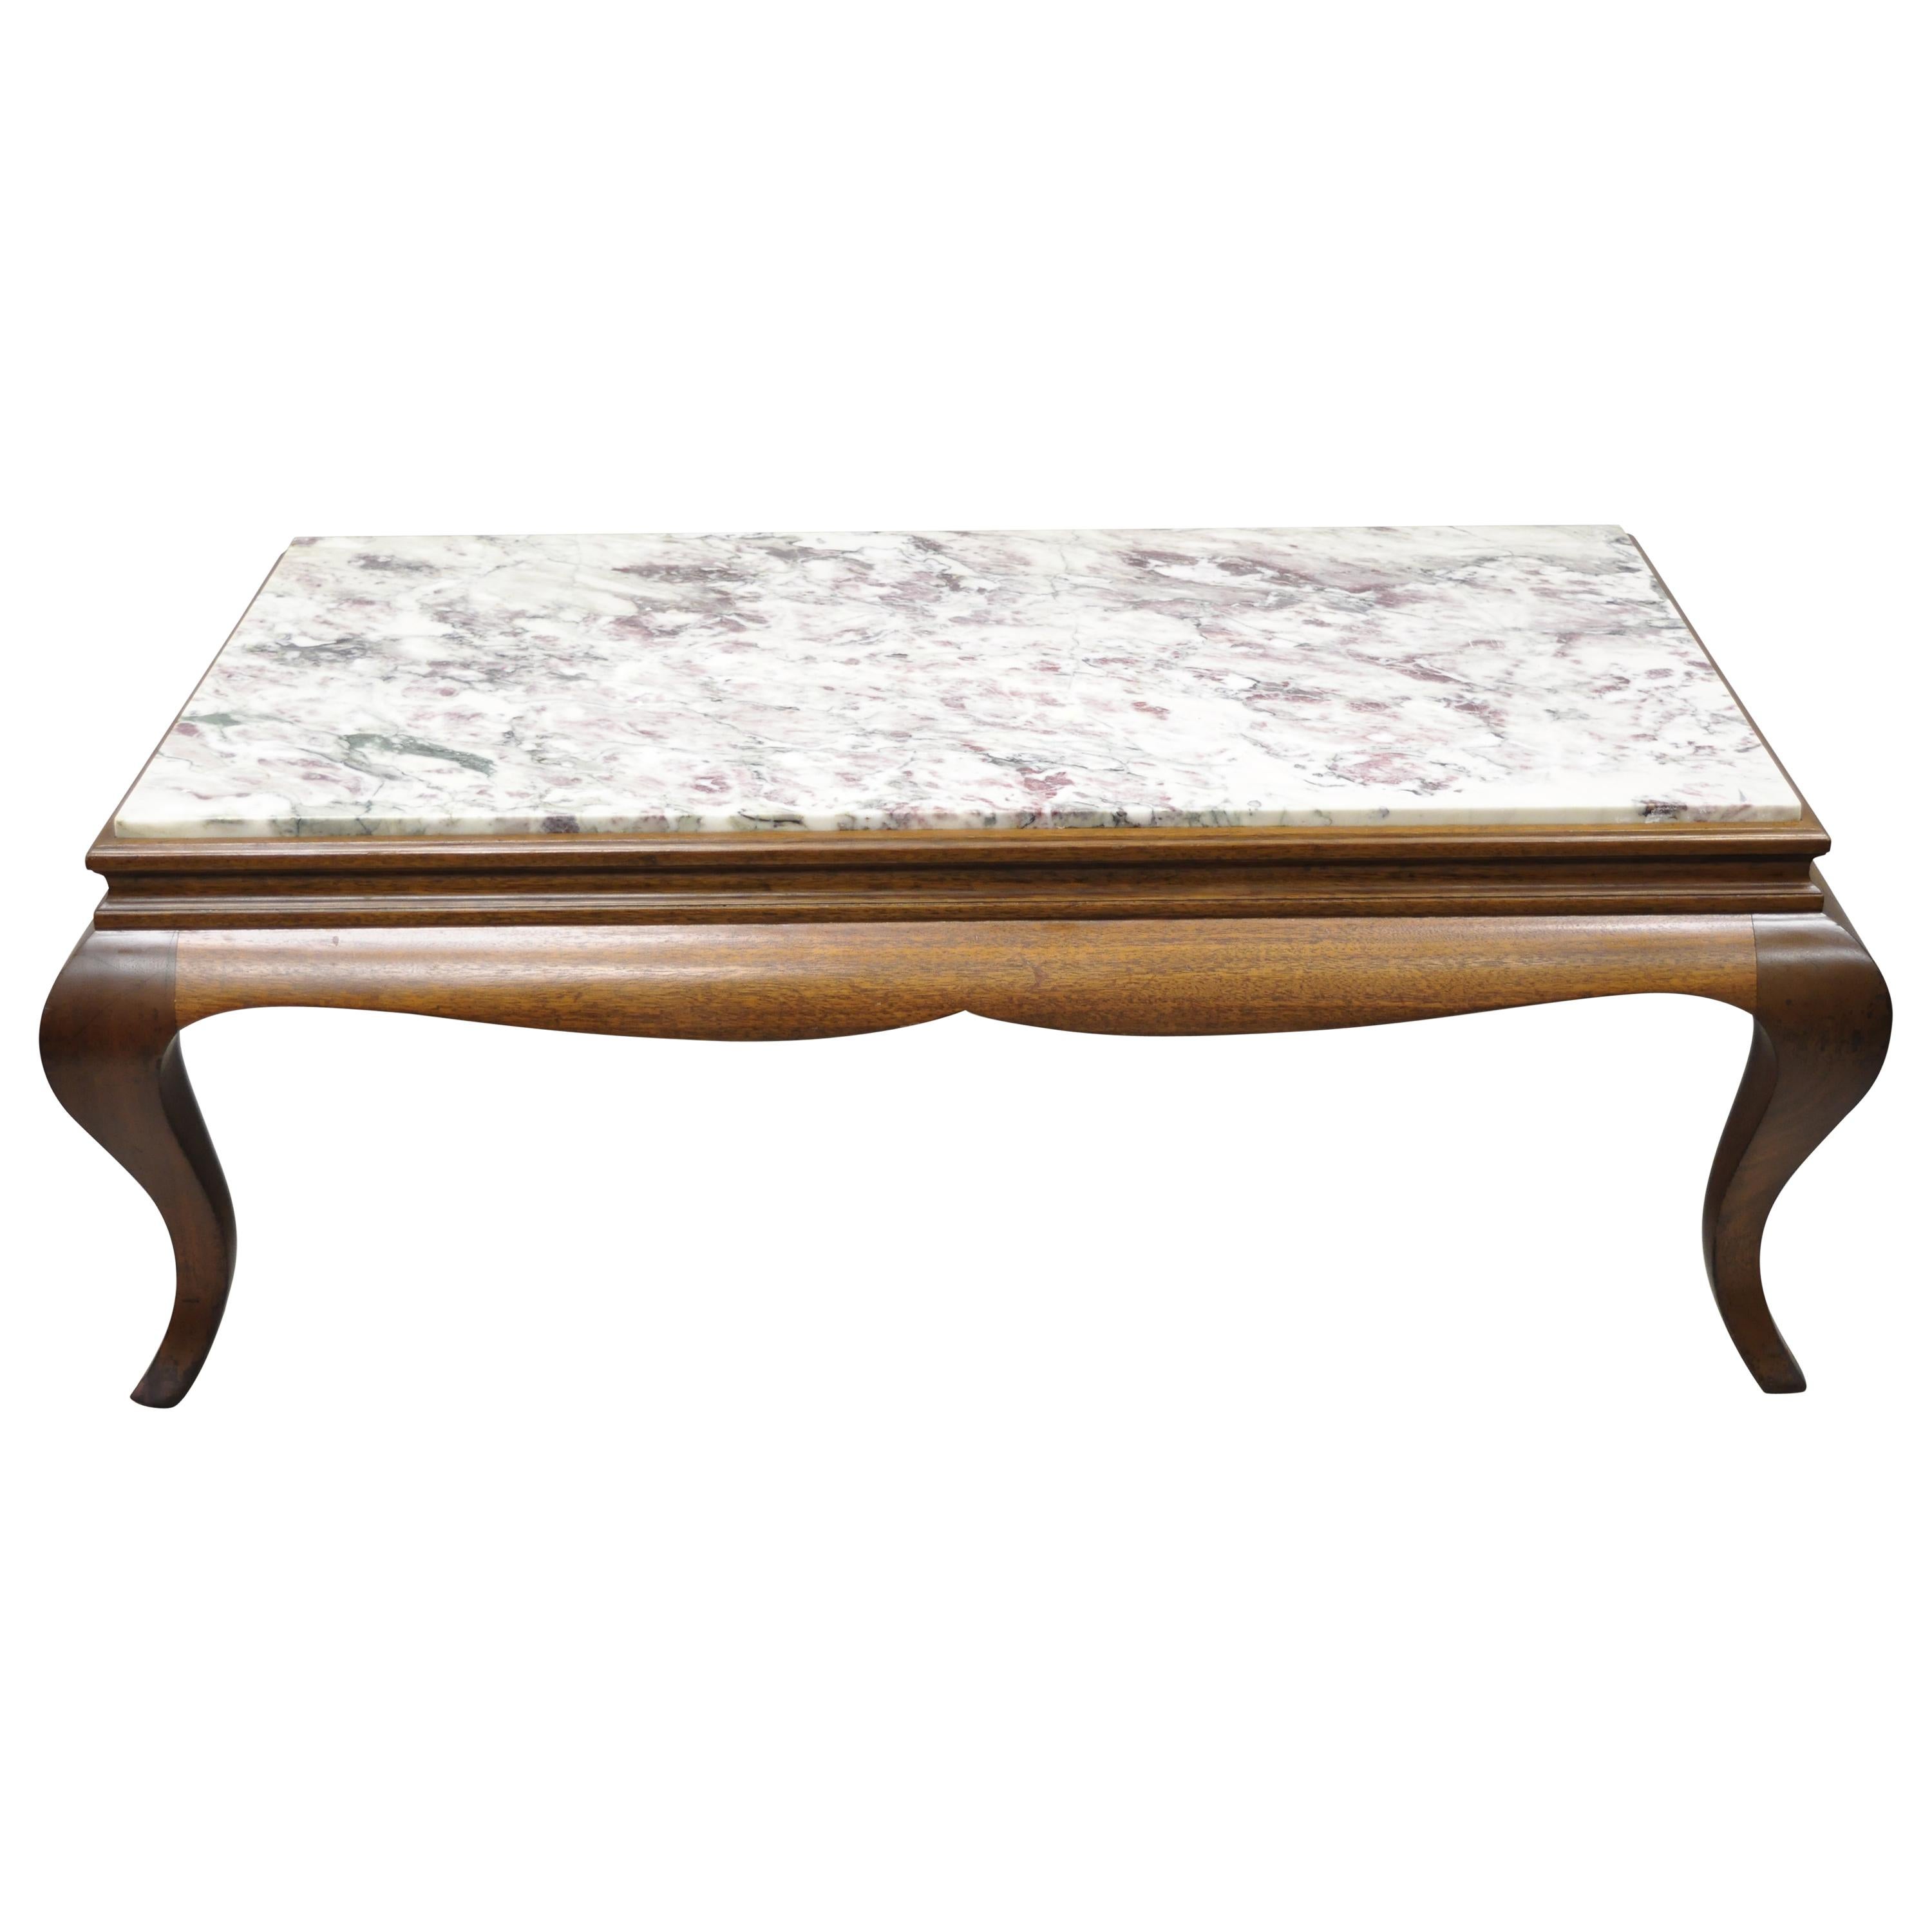 20th Century Georgian Hollywood Regency Mahogany Frame Marble-Top Coffee Table For Sale